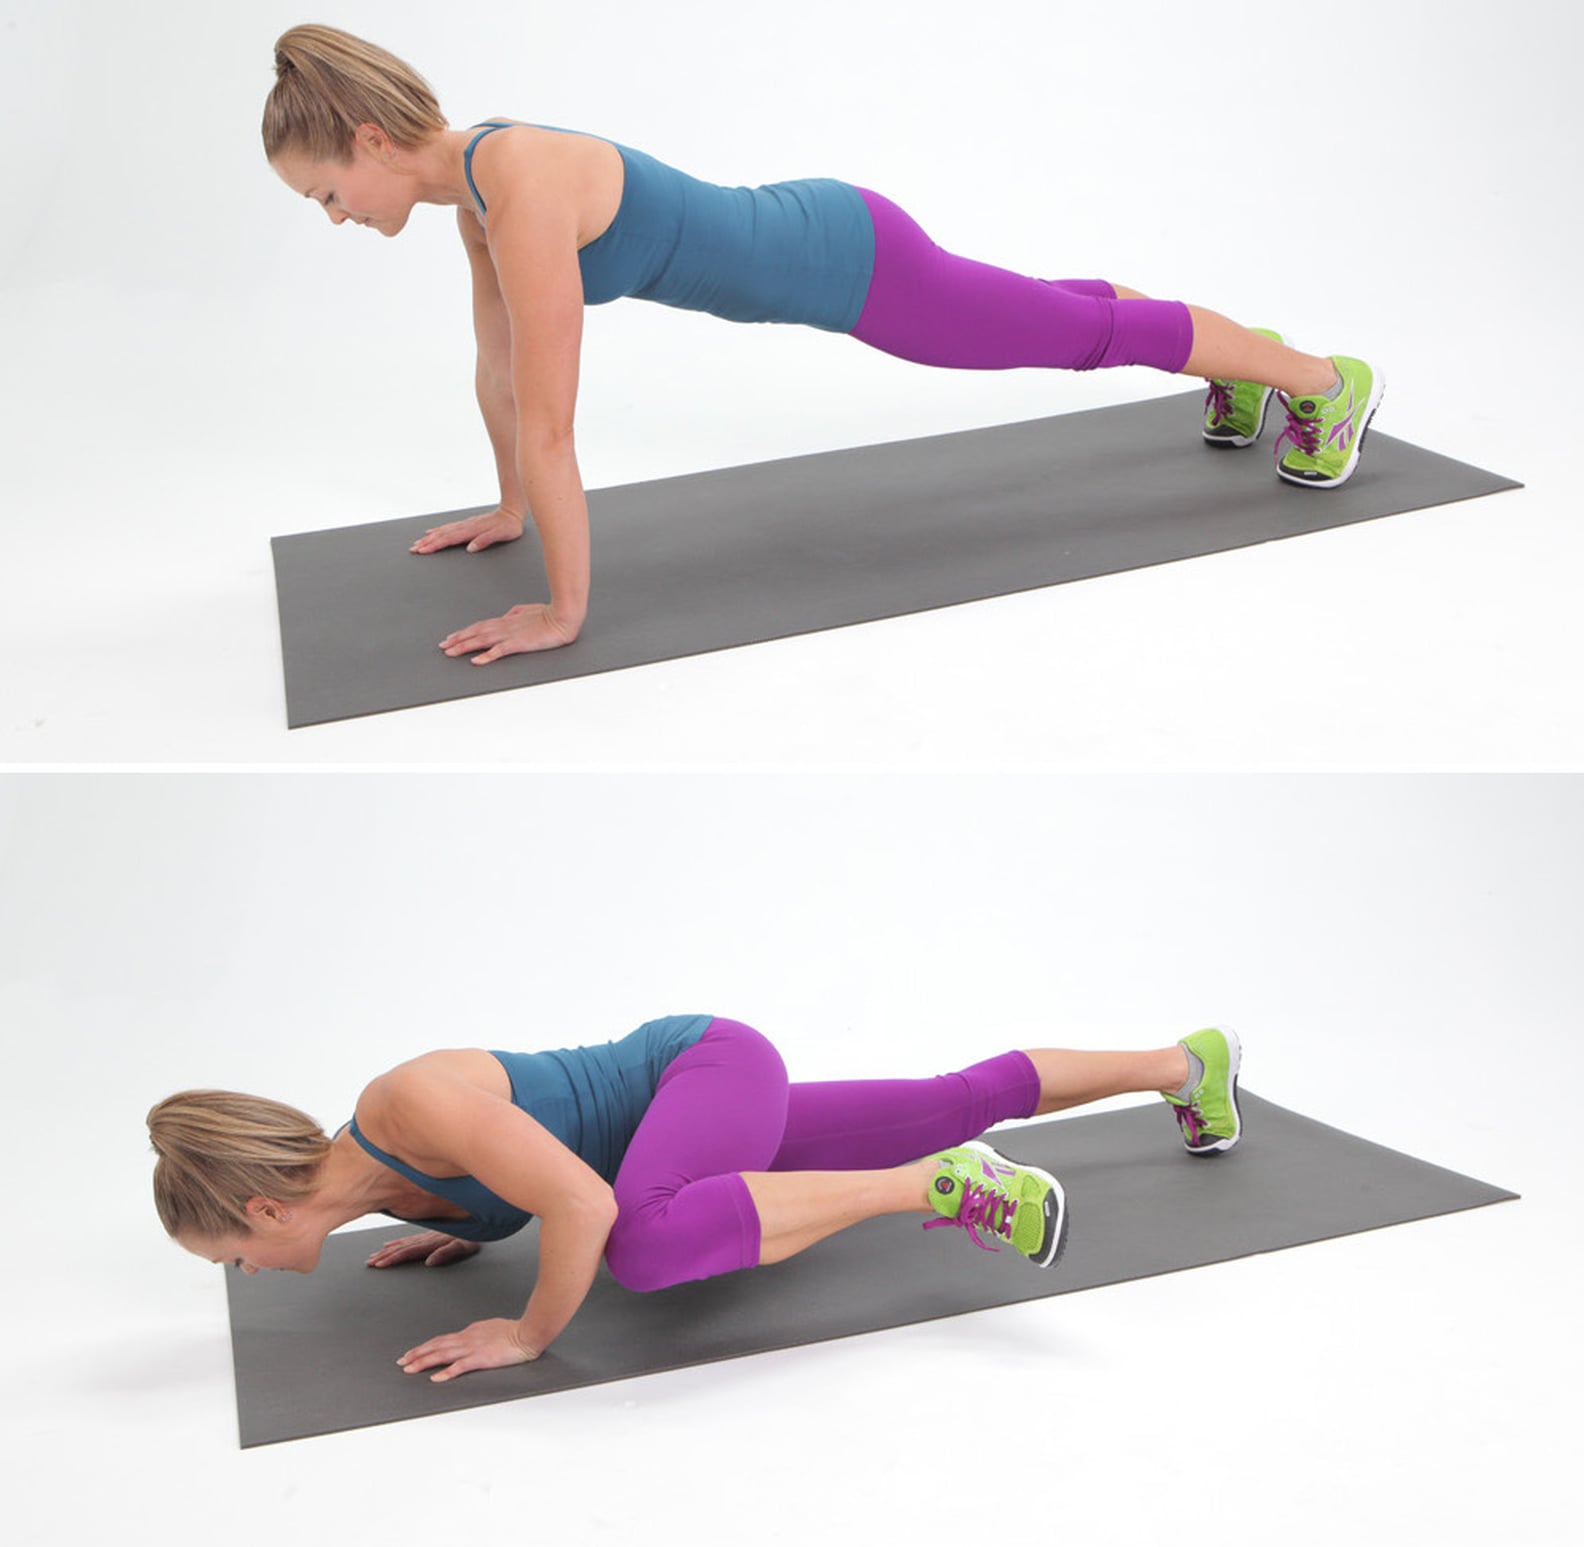 50 Bodyweight and Dumbbell Exercises For Your Upper Body | POPSUGAR Fitness